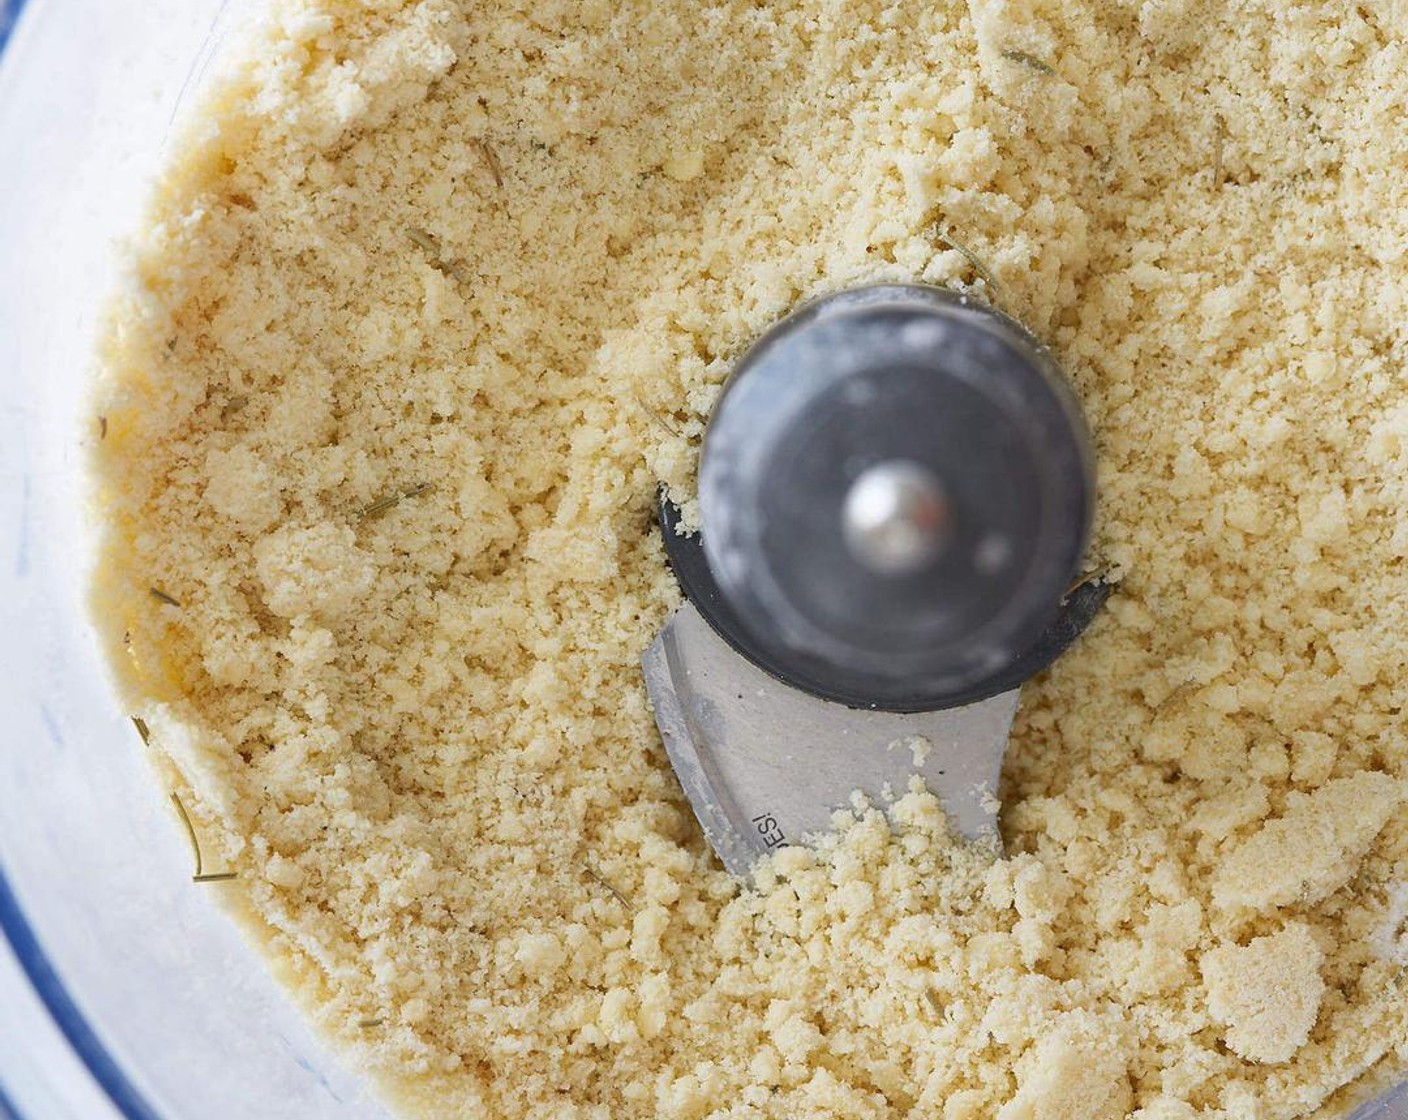 step 2 The easiest way to make the dough for the crust is to use a food processor using the “S” blade. Add to the food processor, the Almond Flour (1 1/2 cups), Tapioca Starch (1/2 cup), Dried Rosemary (1 Tbsp), Salt (1/2 tsp), and Butter (1/3 cup). Pulse until it’s the texture of coarse meal.